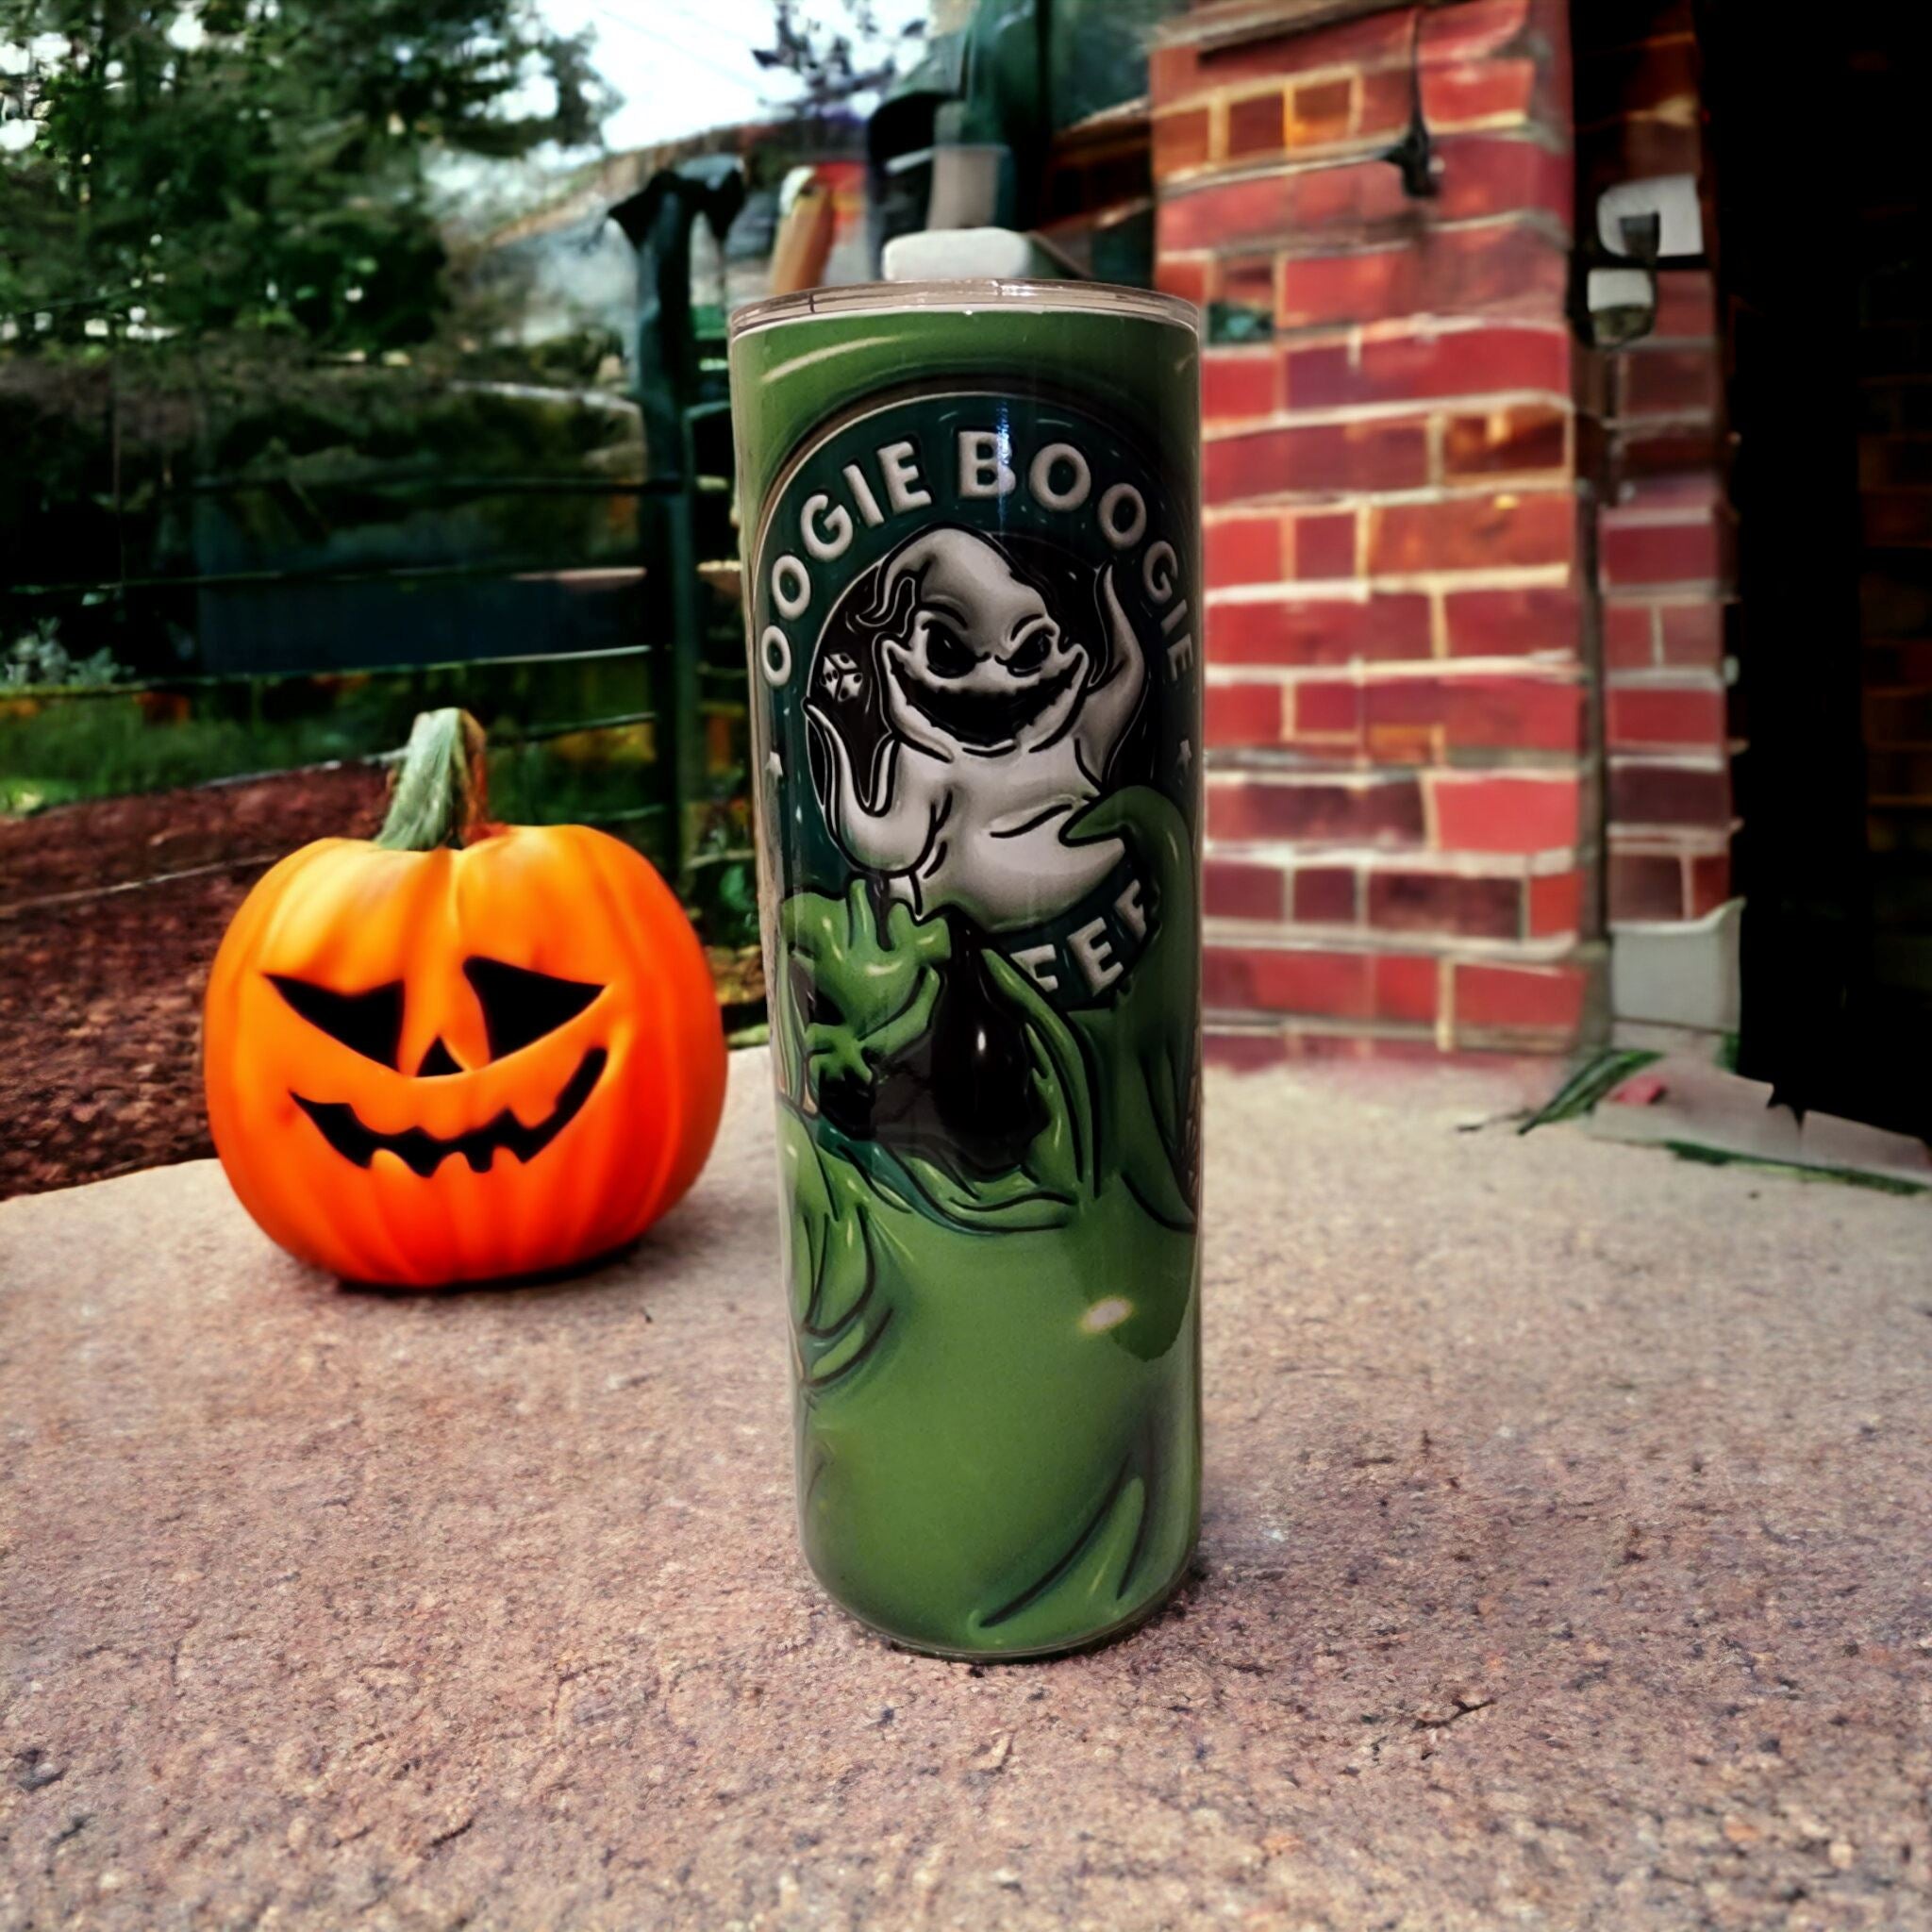 https://cdn.shopify.com/s/files/1/0659/8390/6035/products/oogie-boogie-coffee-20oz-tumbler-gravesfamilycreations-176904.jpg?v=1692929549